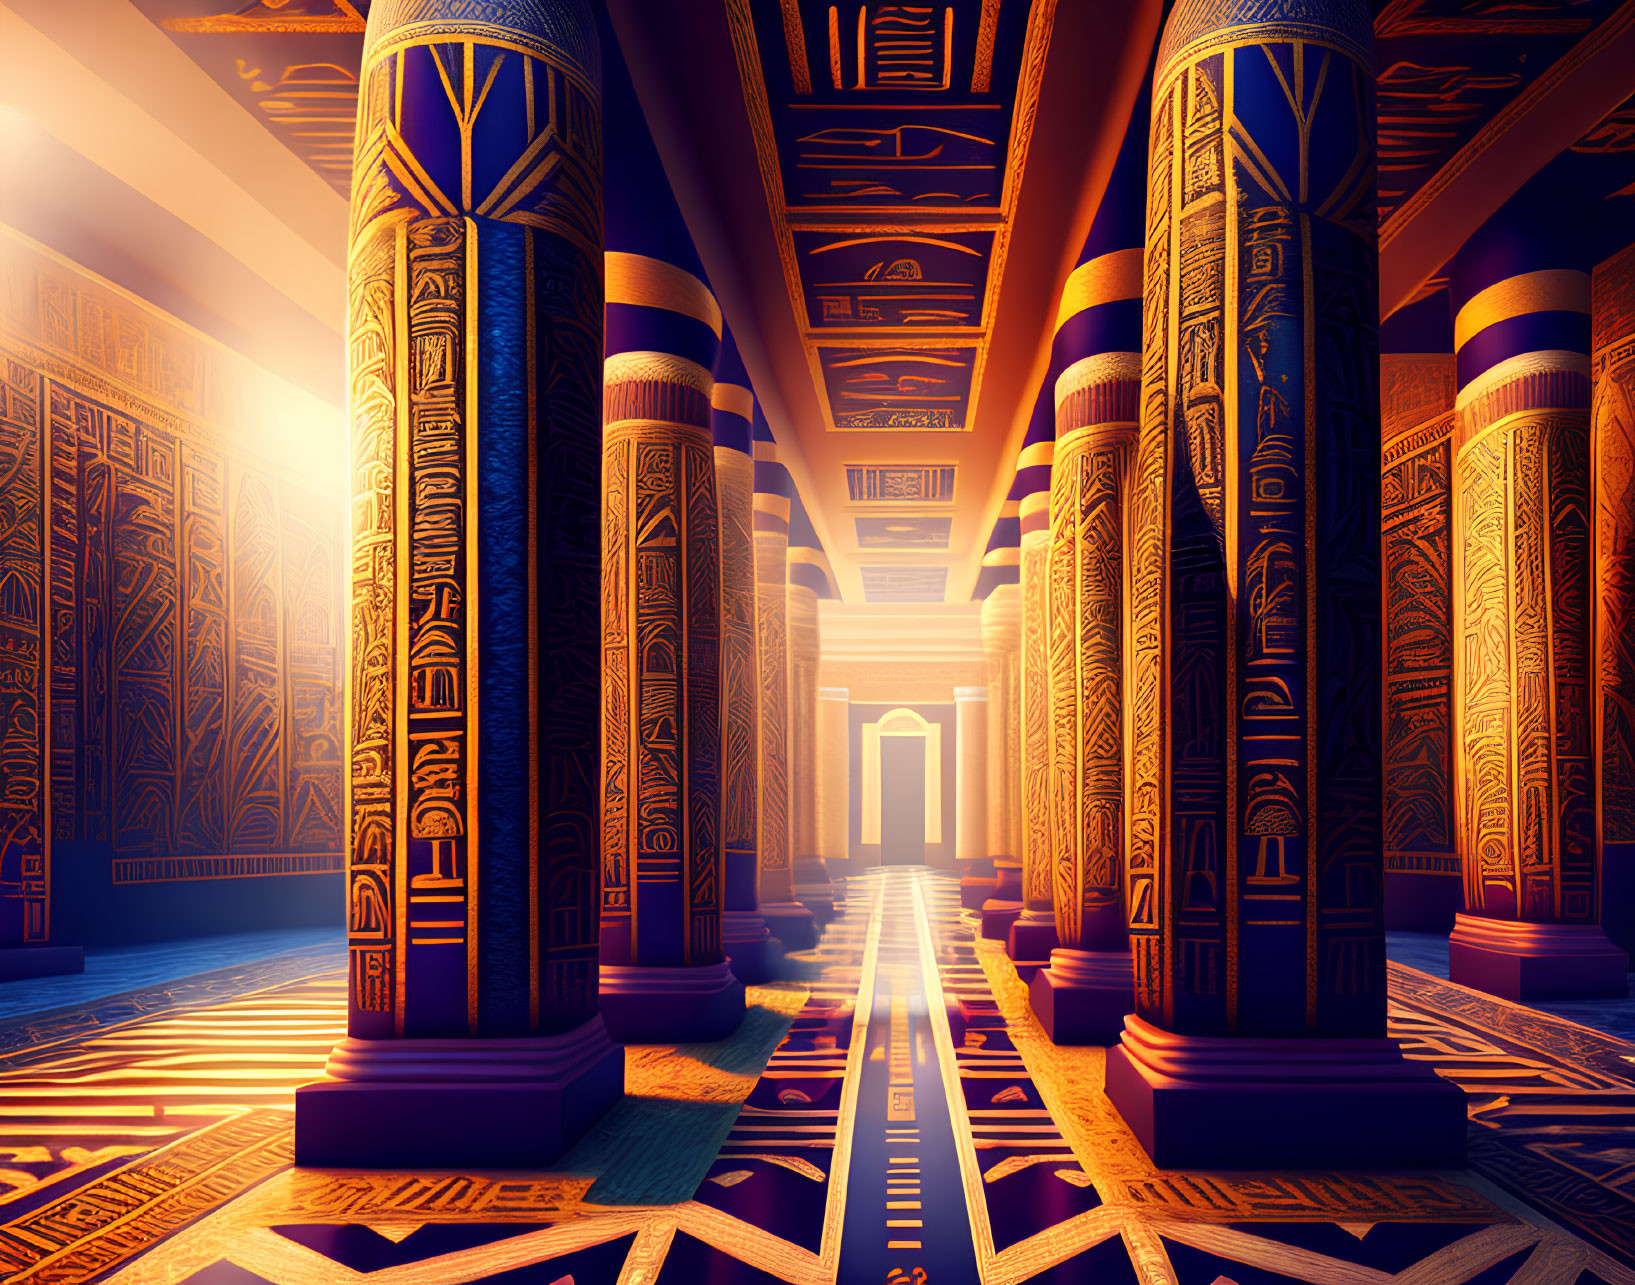 Ancient Egyptian temple with hieroglyph-covered columns and wall carvings